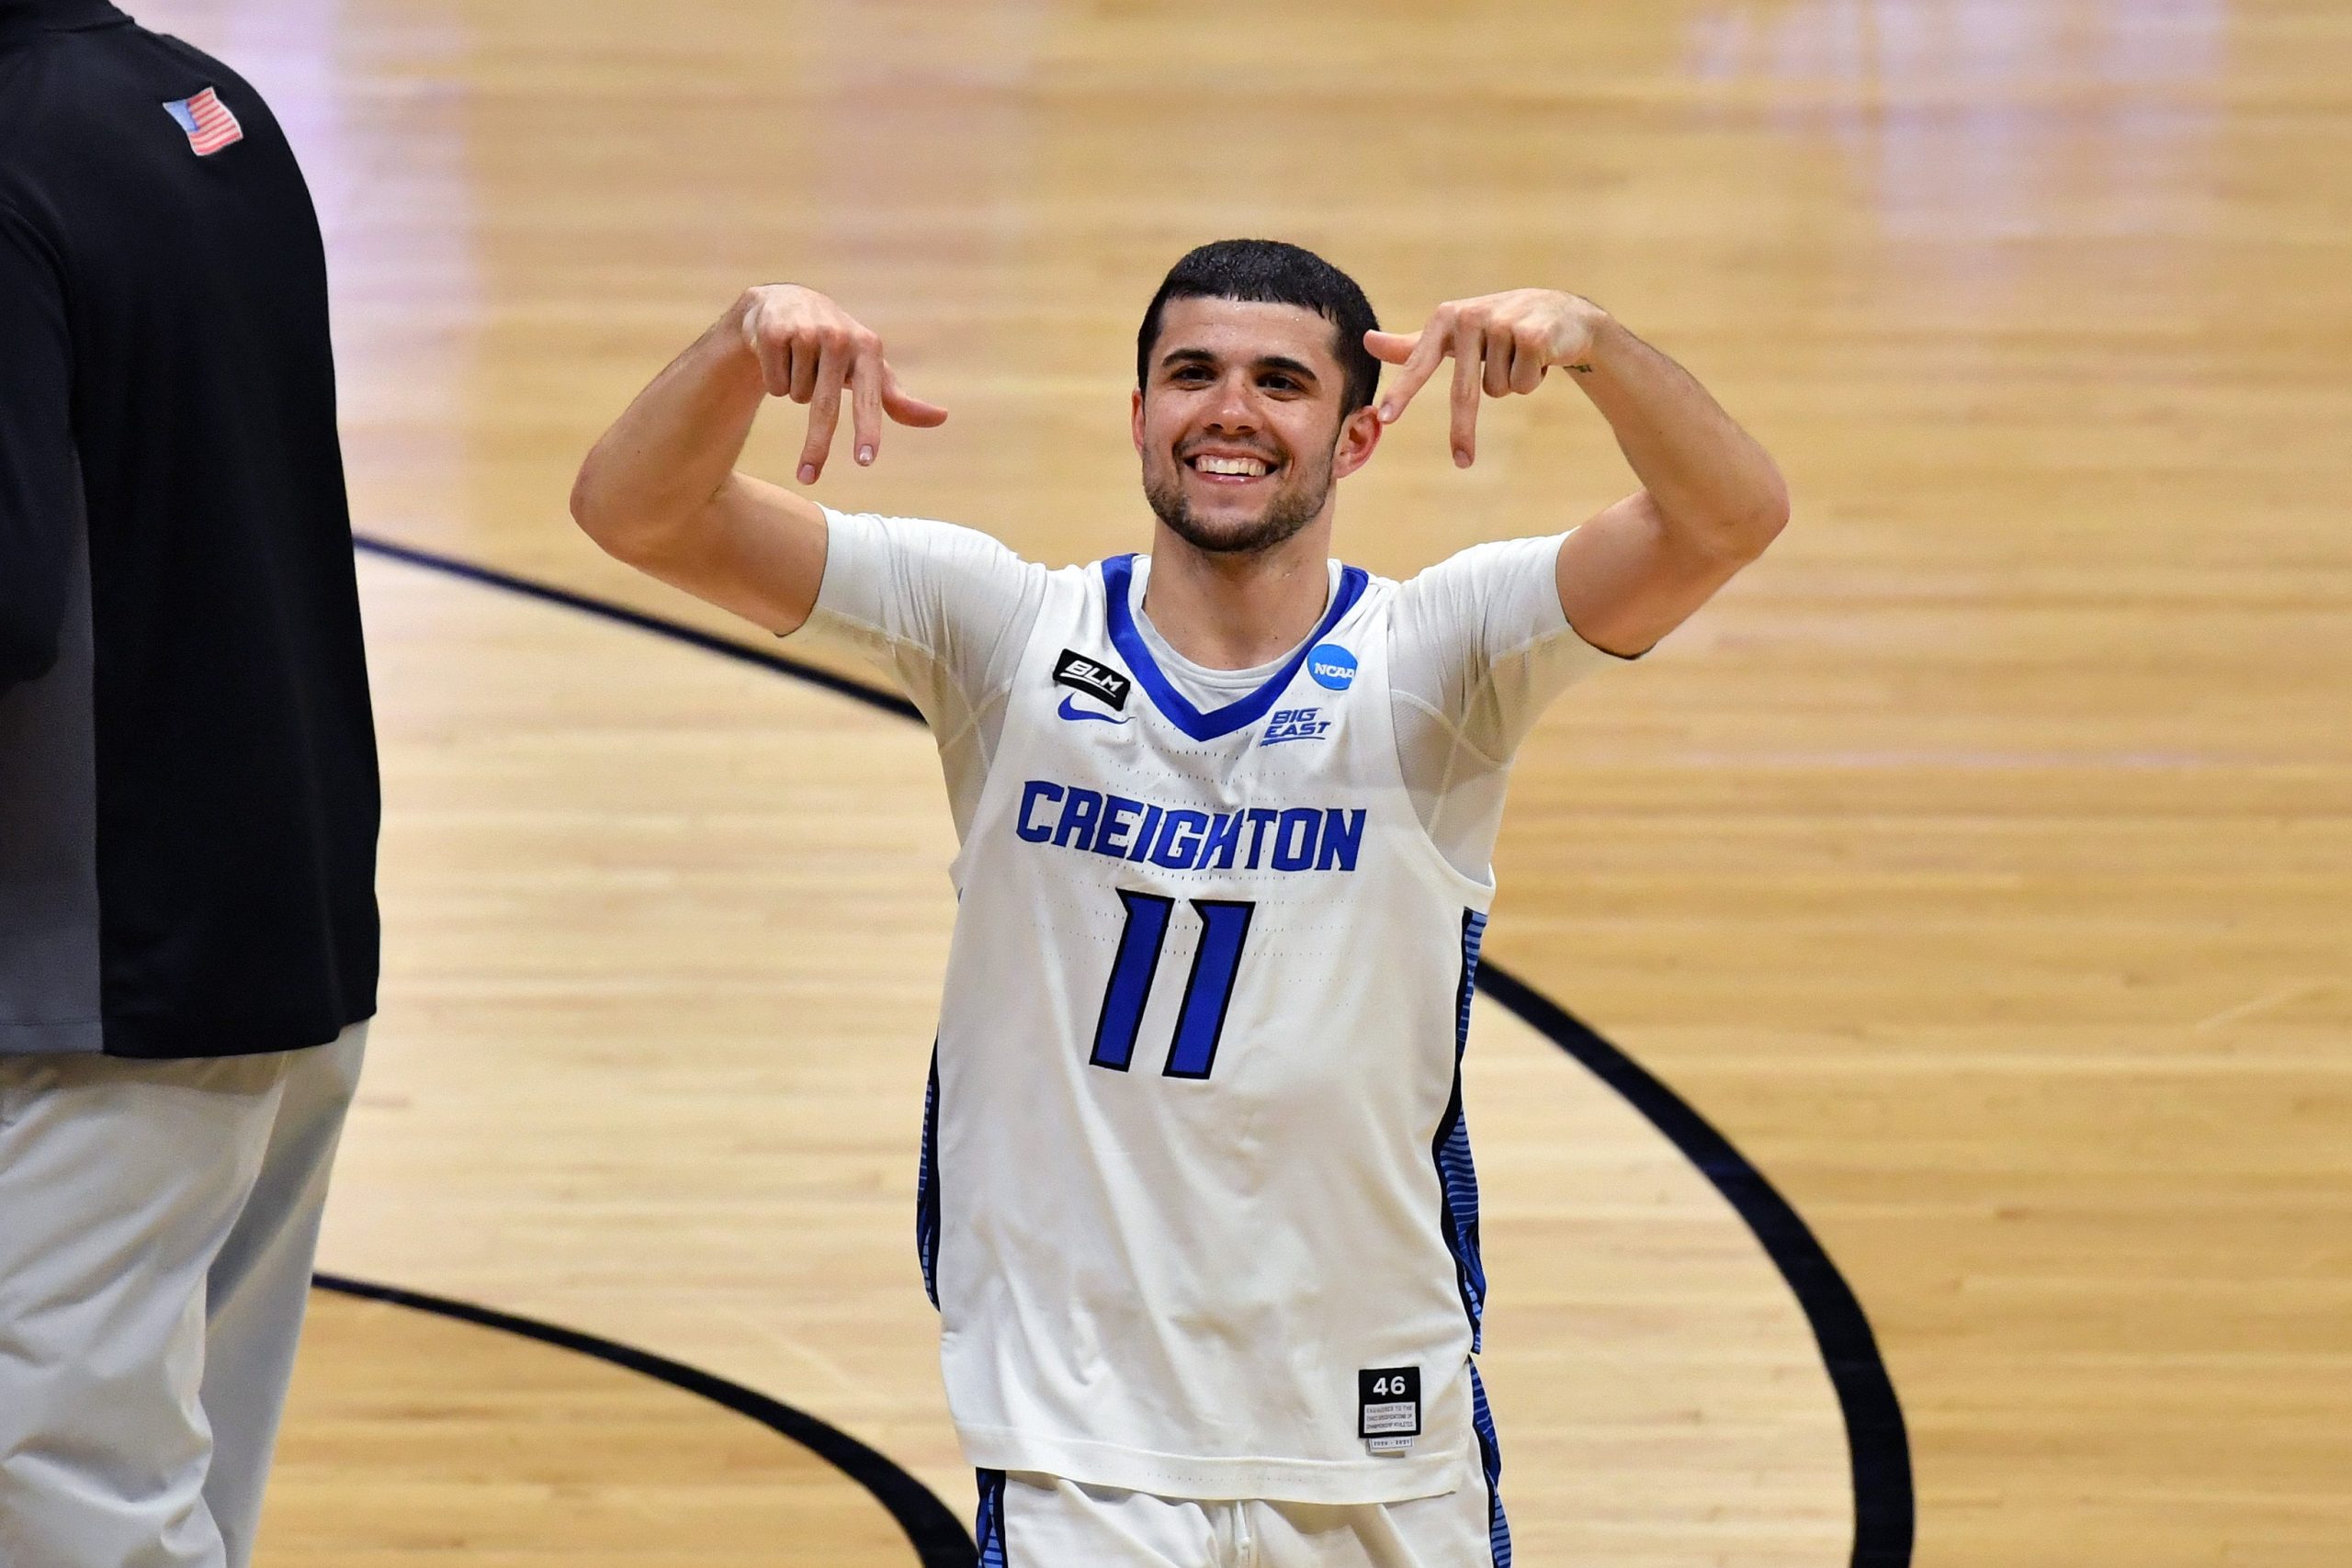 Creighton Bluejays guard Marcus Zegarowski (11) celebrates after defeating the Ohio Bobcats in the second round of the 2021 NCAA Tournament at Hinkle Fieldhouse